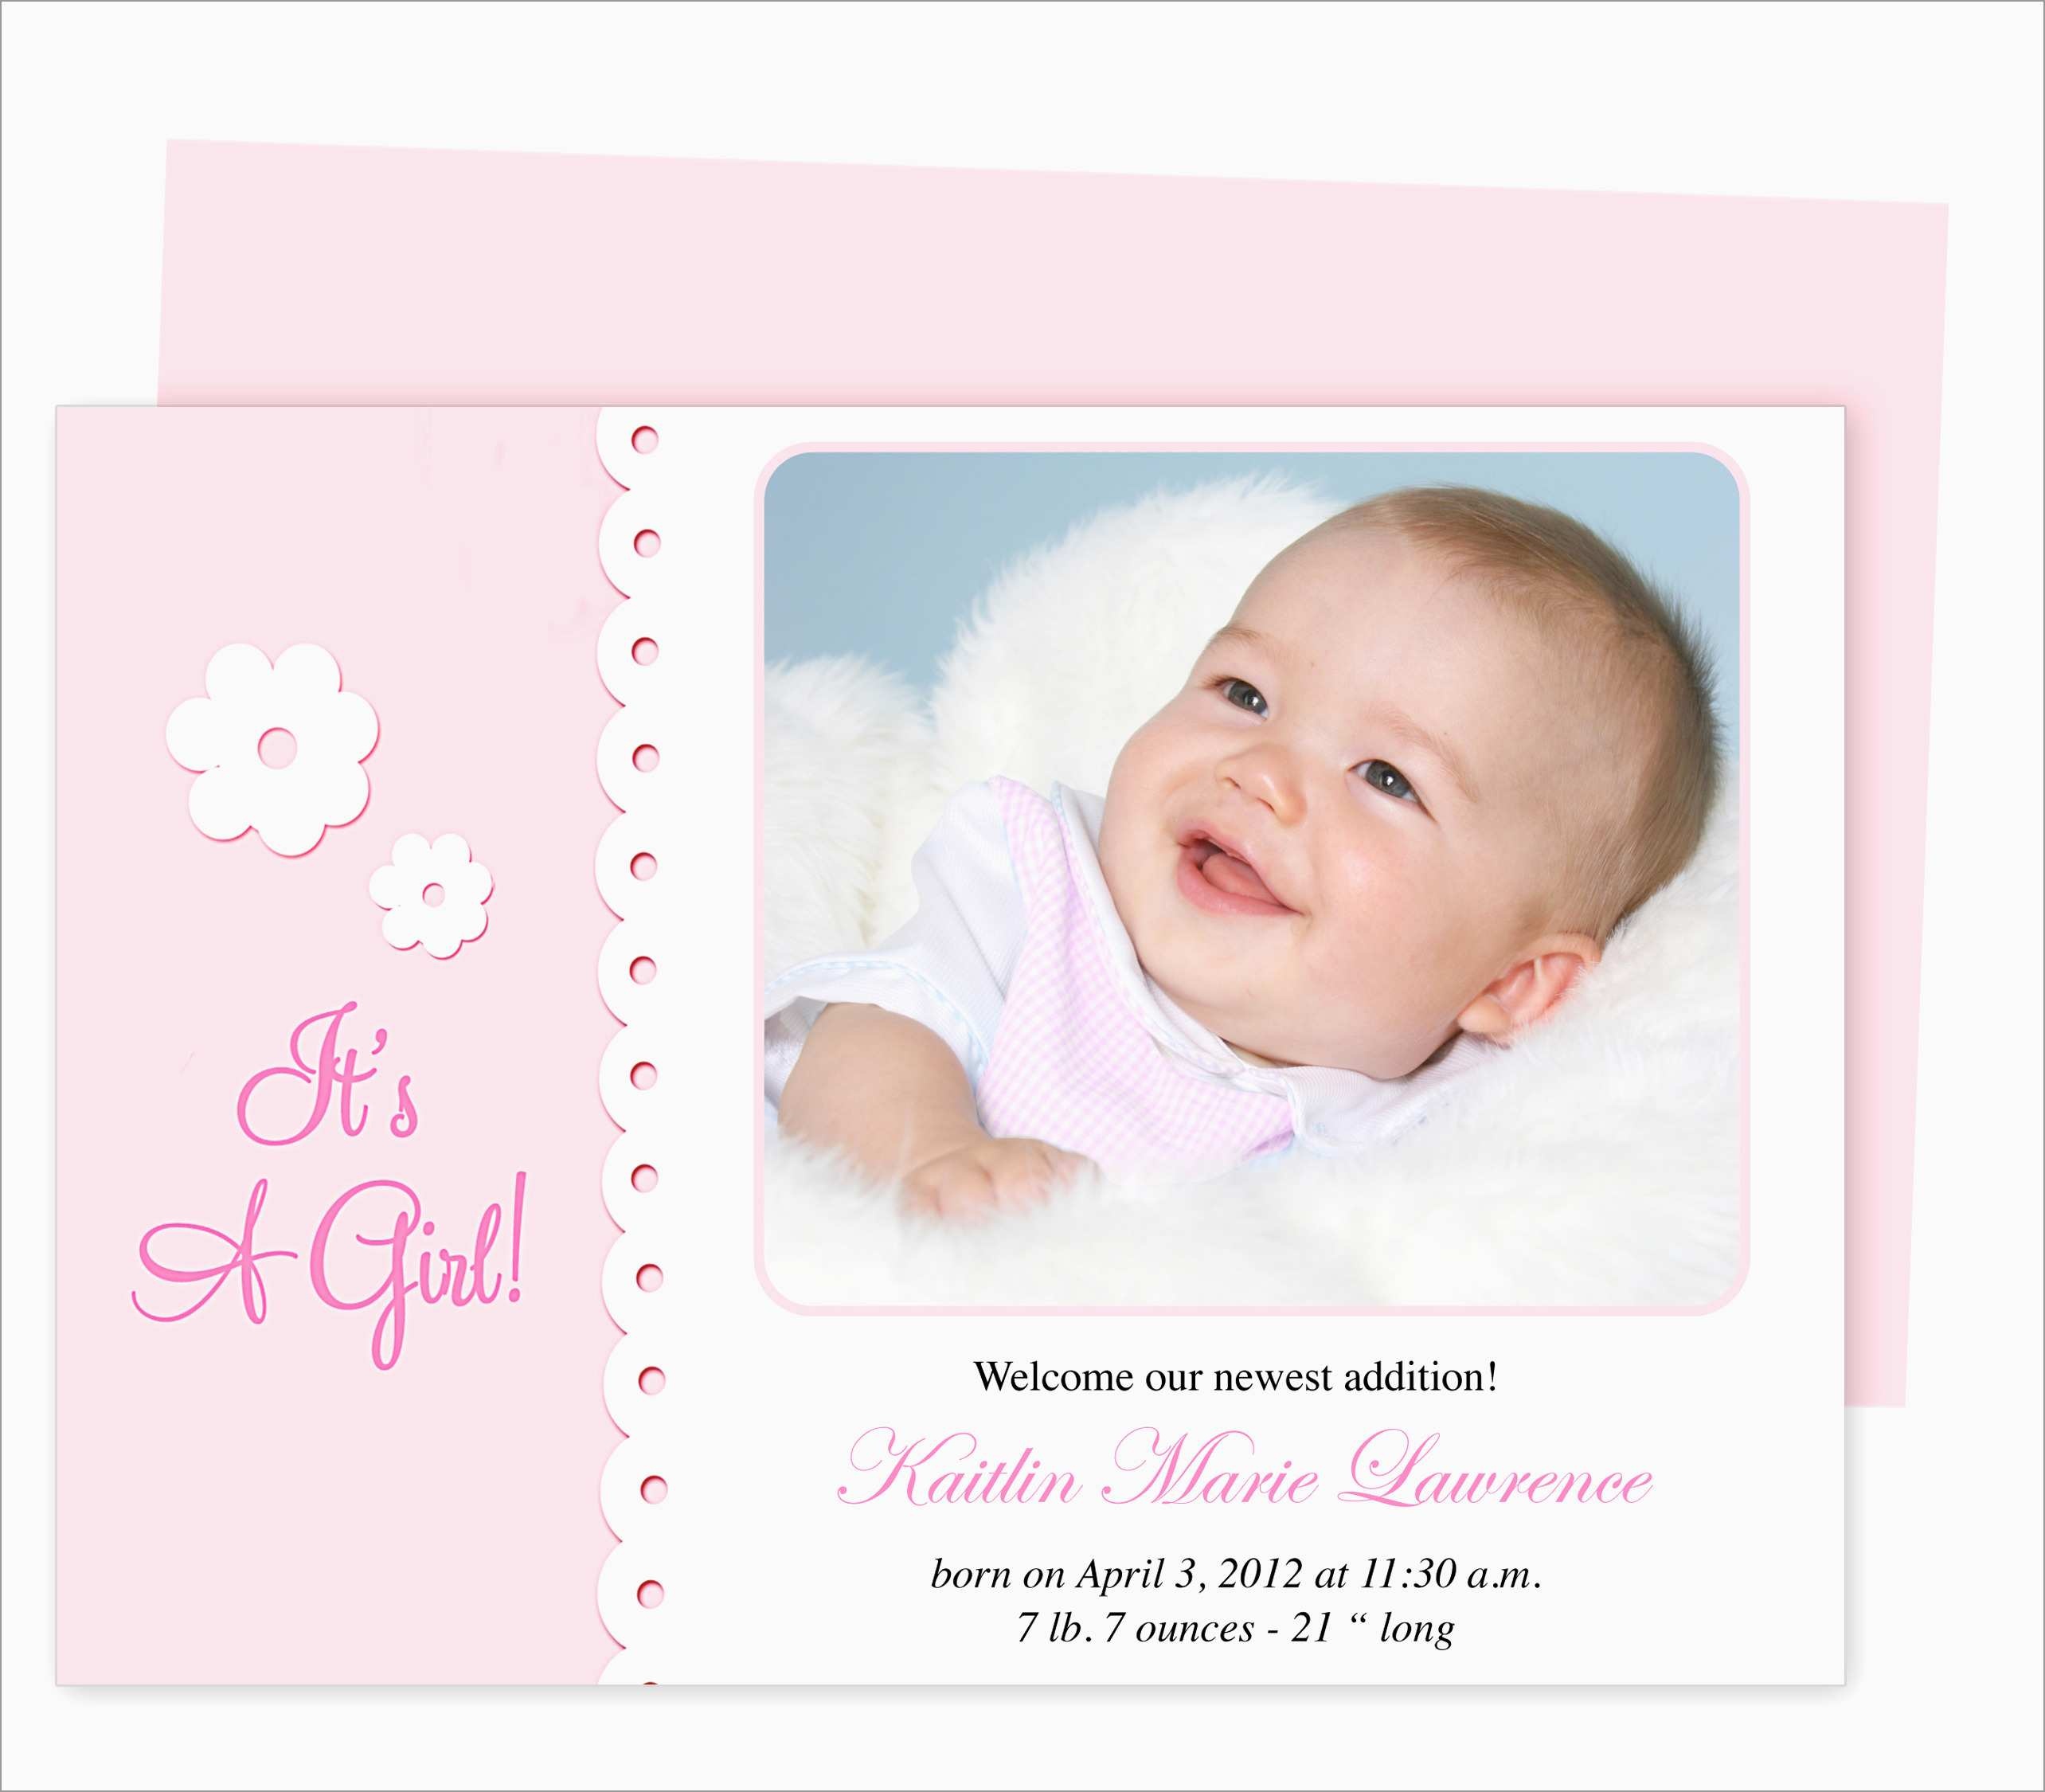 Luxury Birth Announcement Template Free Printable | Best Of Template - Free Printable Baby Birth Announcement Cards